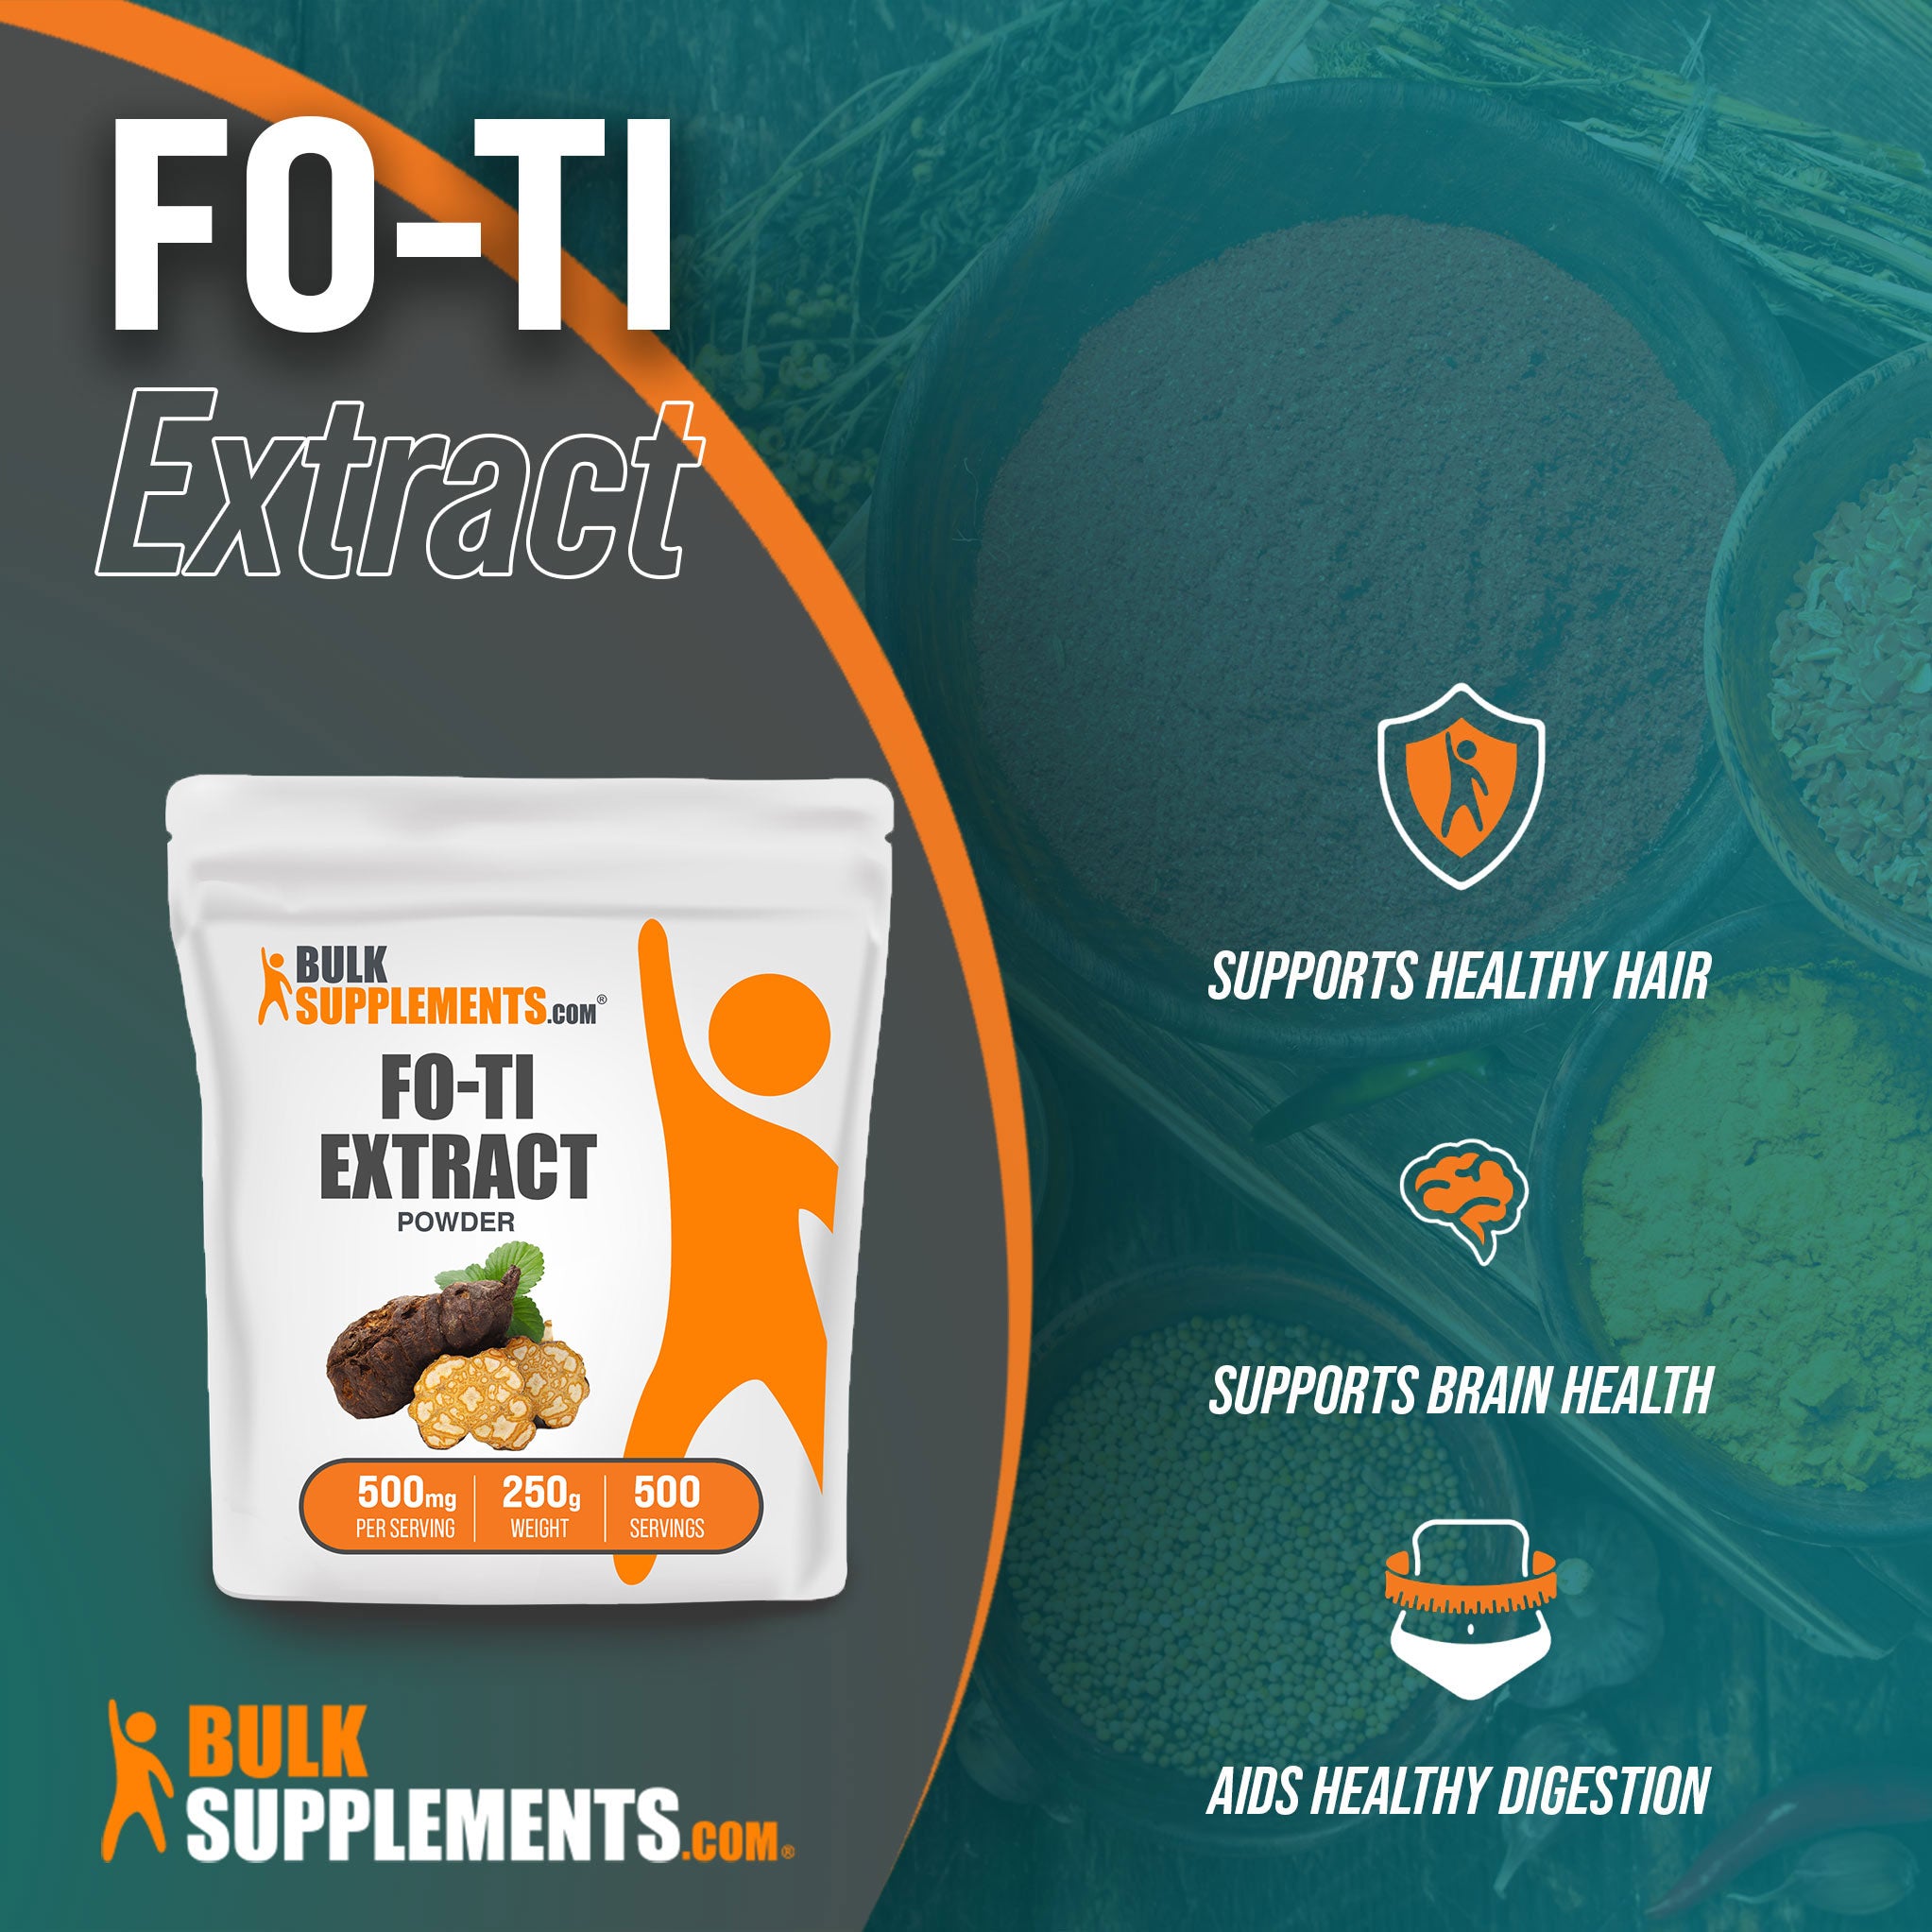 Benefits of Fo-Ti Extract; supports healthy hair, supports brain health, aids healthy digestion